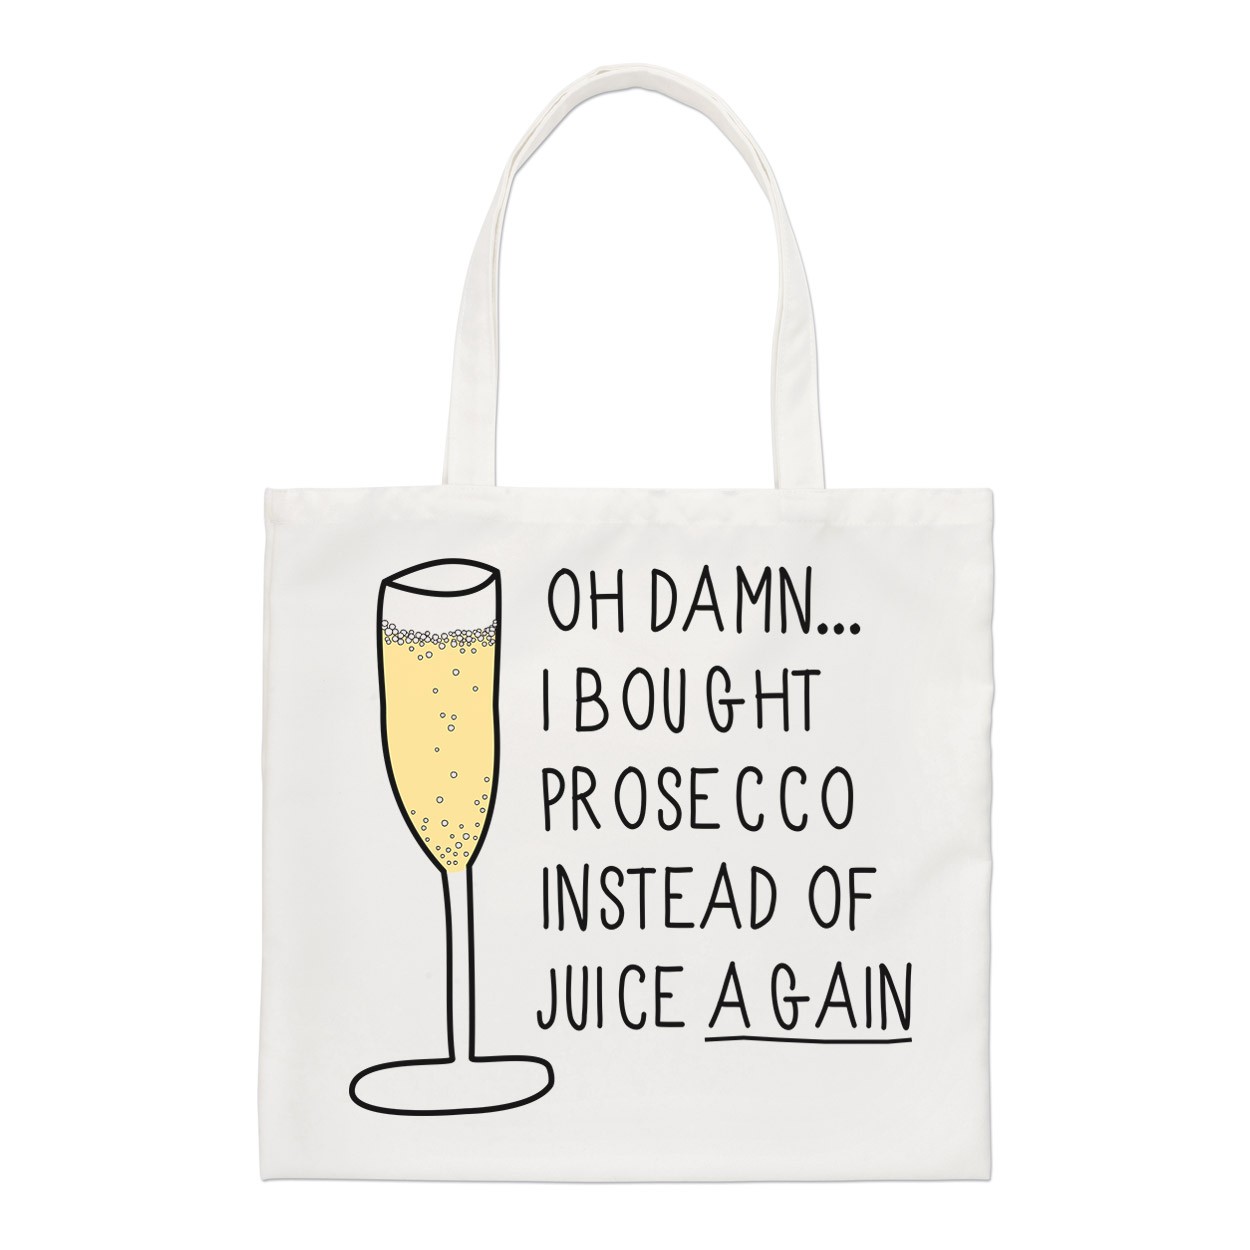 Oh Damn I Bought Prosecco Instead Of Juice Again Regular Tote Bag